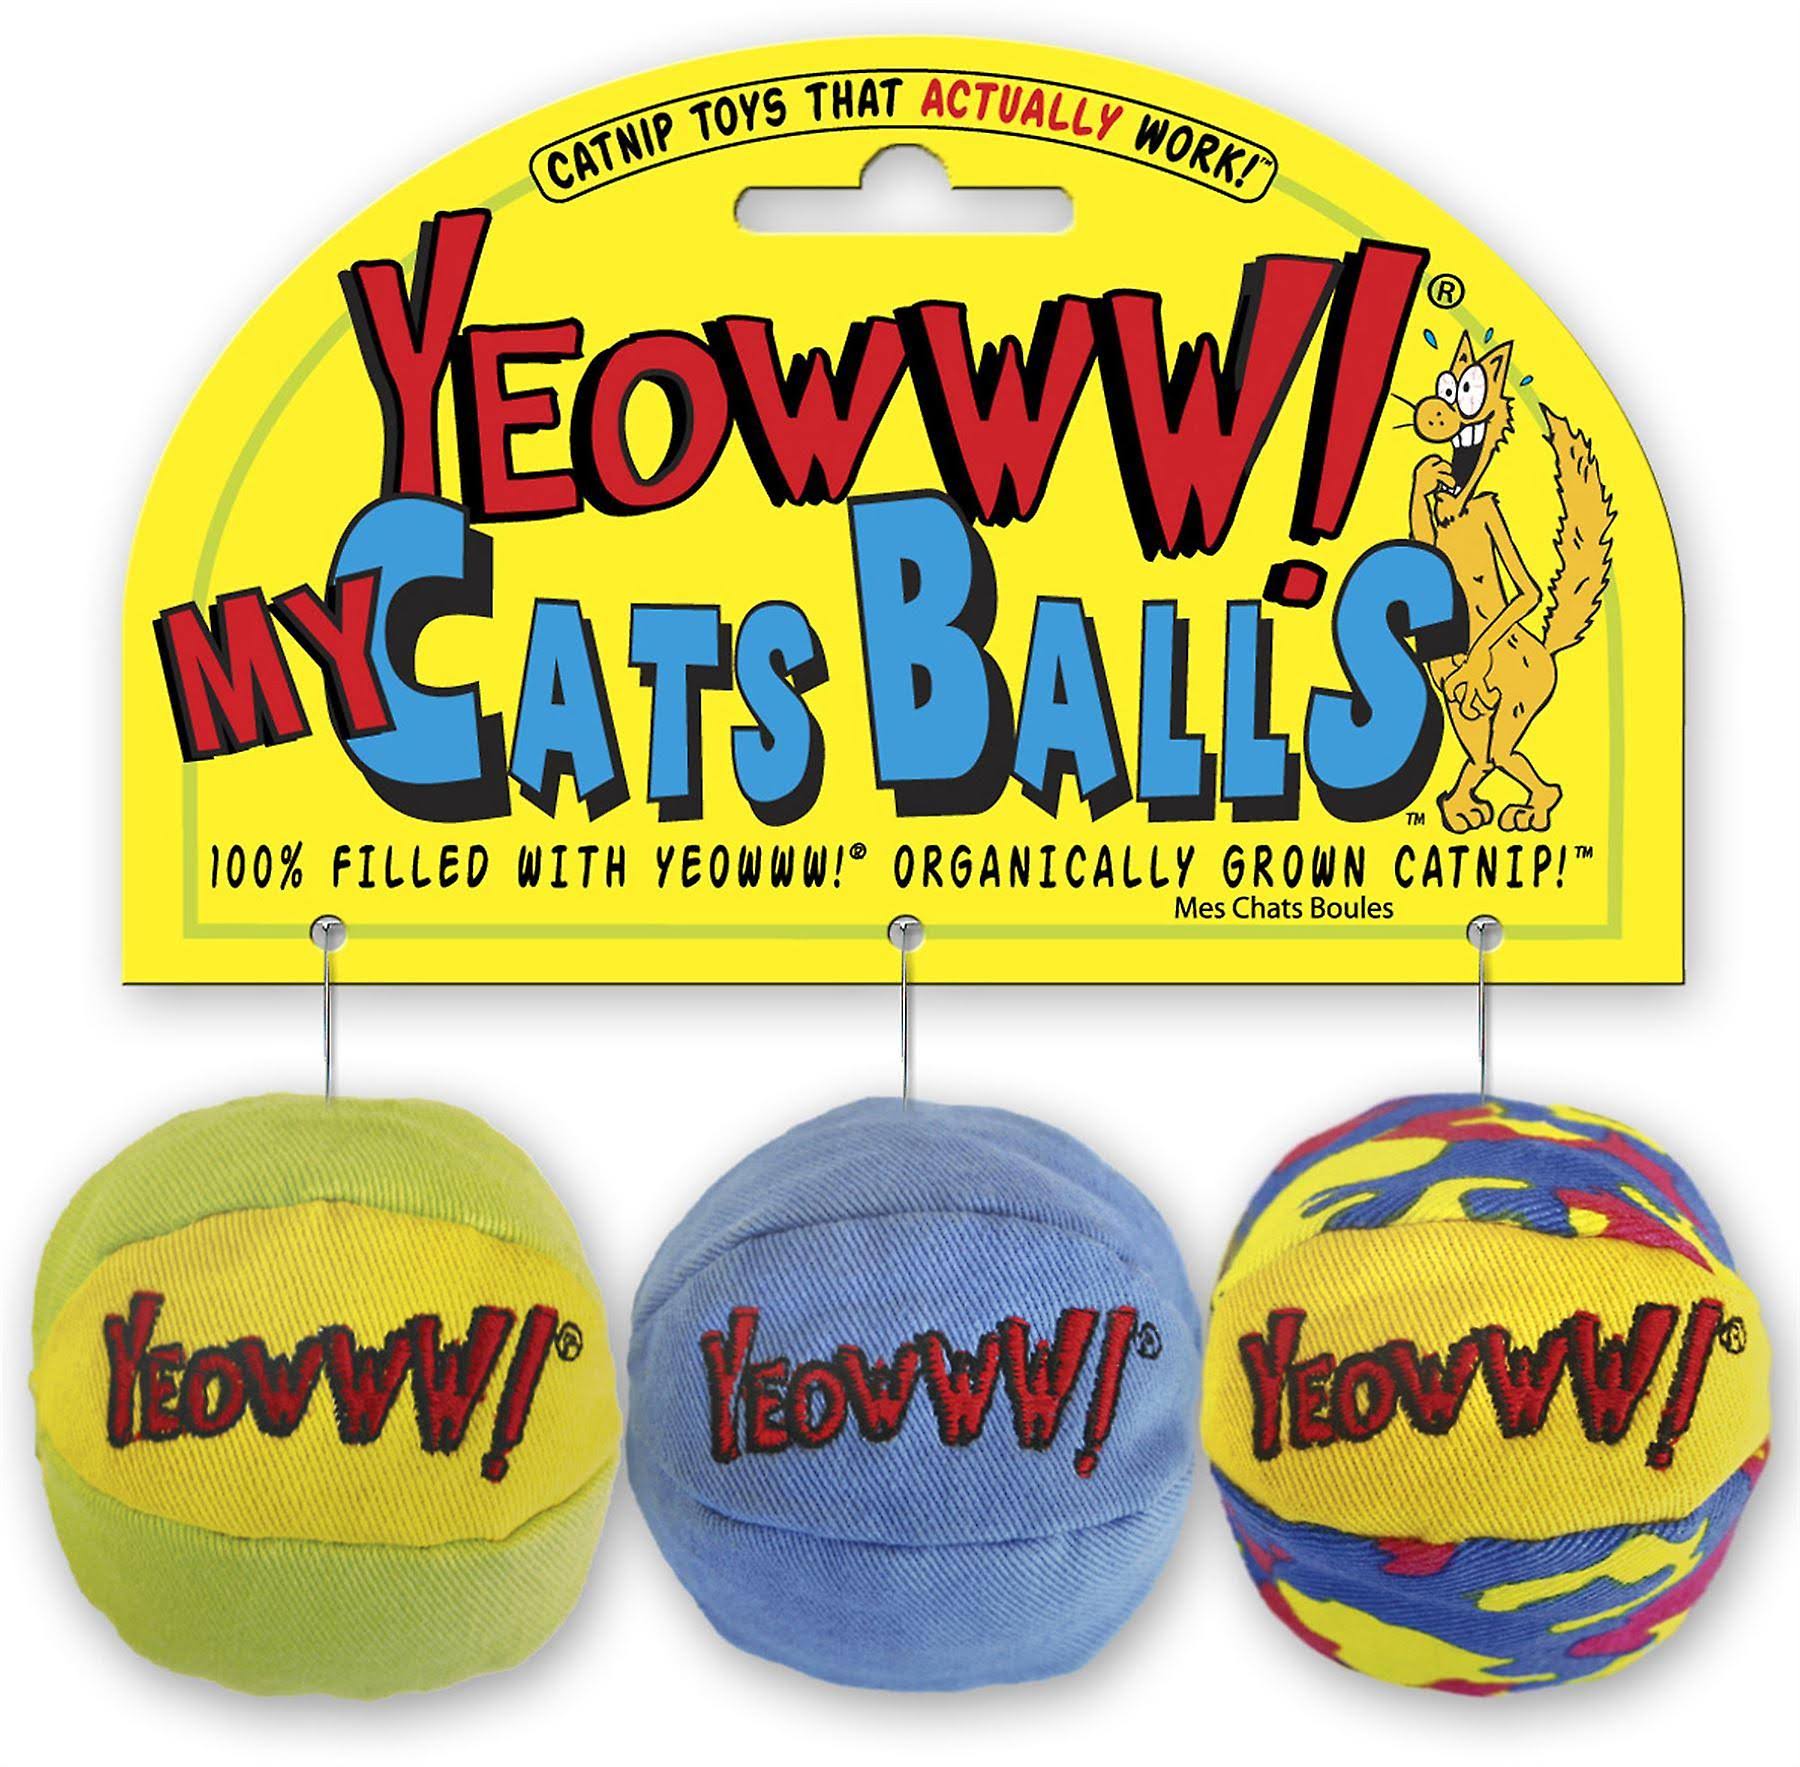 Yeowww My Cats Balls Cat Toy - 3 Pack